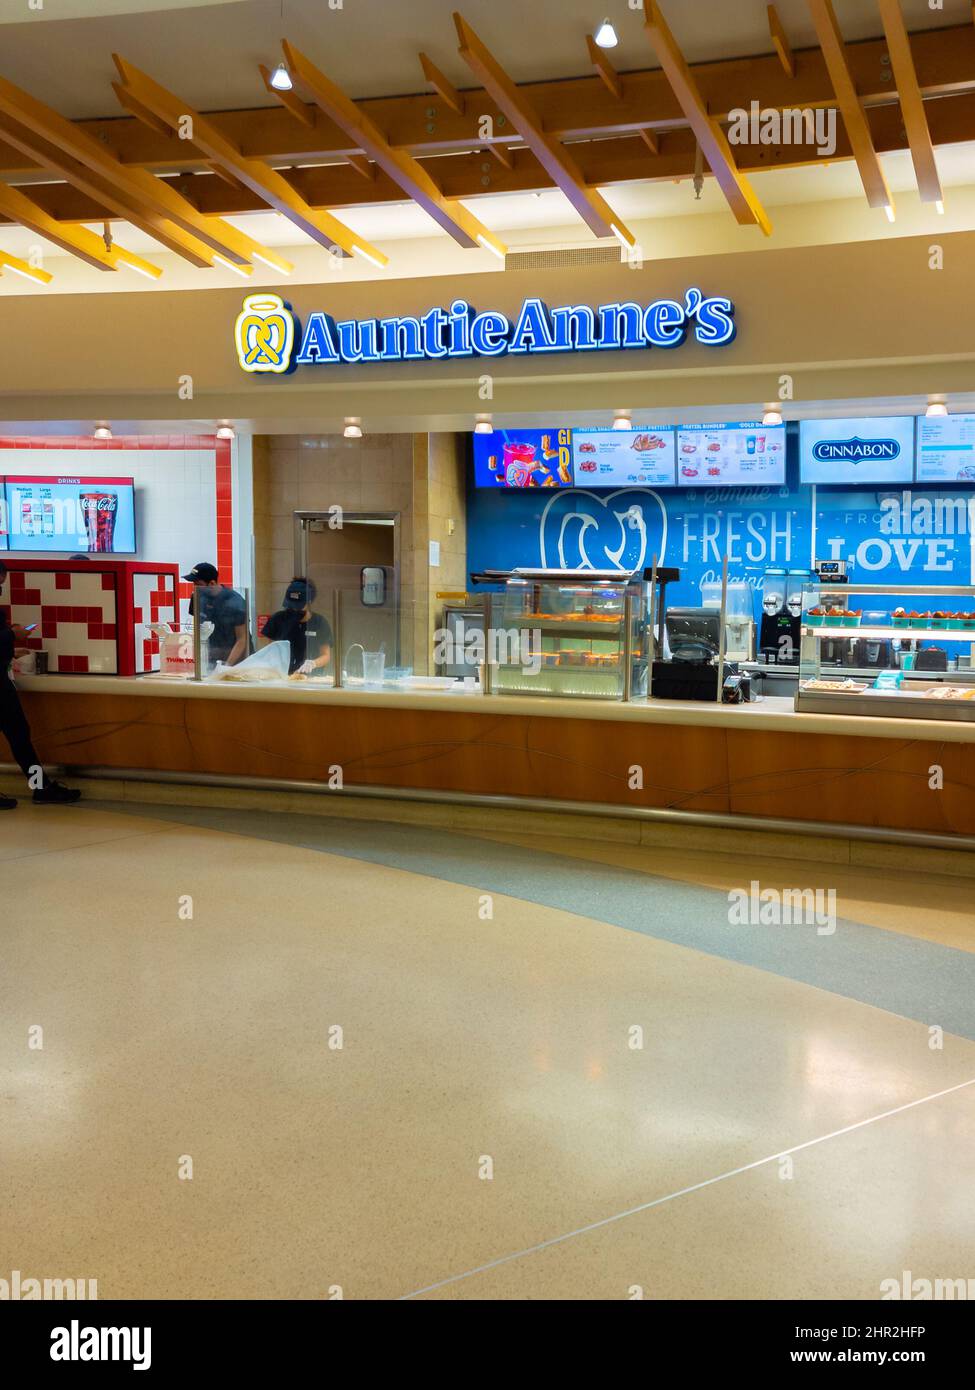 Orlando, Florida - February 4, 2022: Wide View of Auntie Anne's Shop inside Terminal B of Orlando International Airport Stock Photo